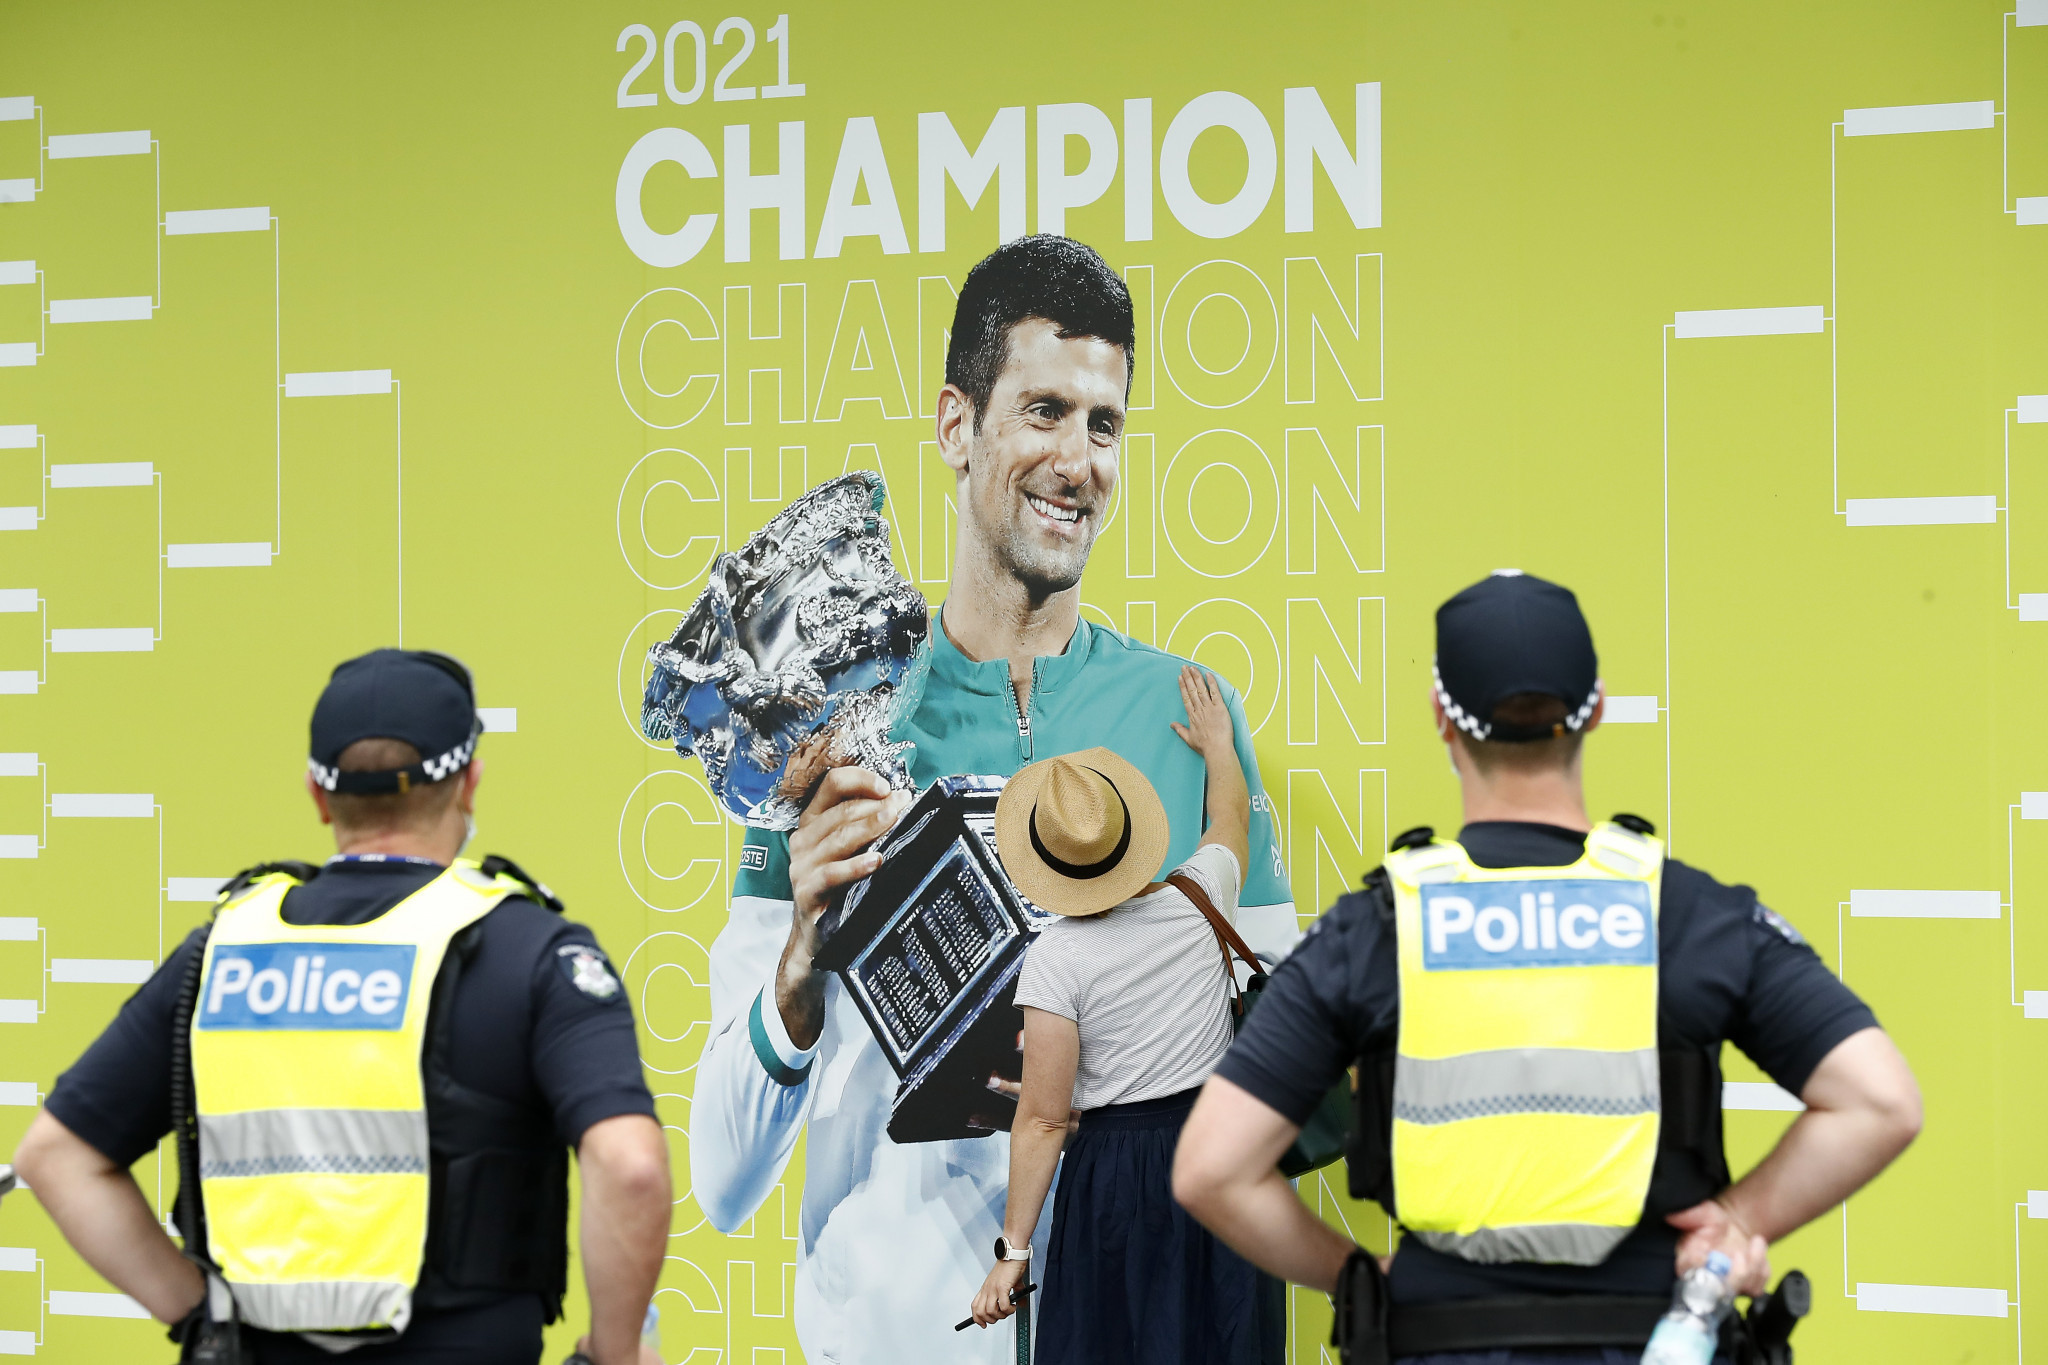 The unvaccinated Novak Djokovic was deported from Australia before he could defend his title ©Getty Images